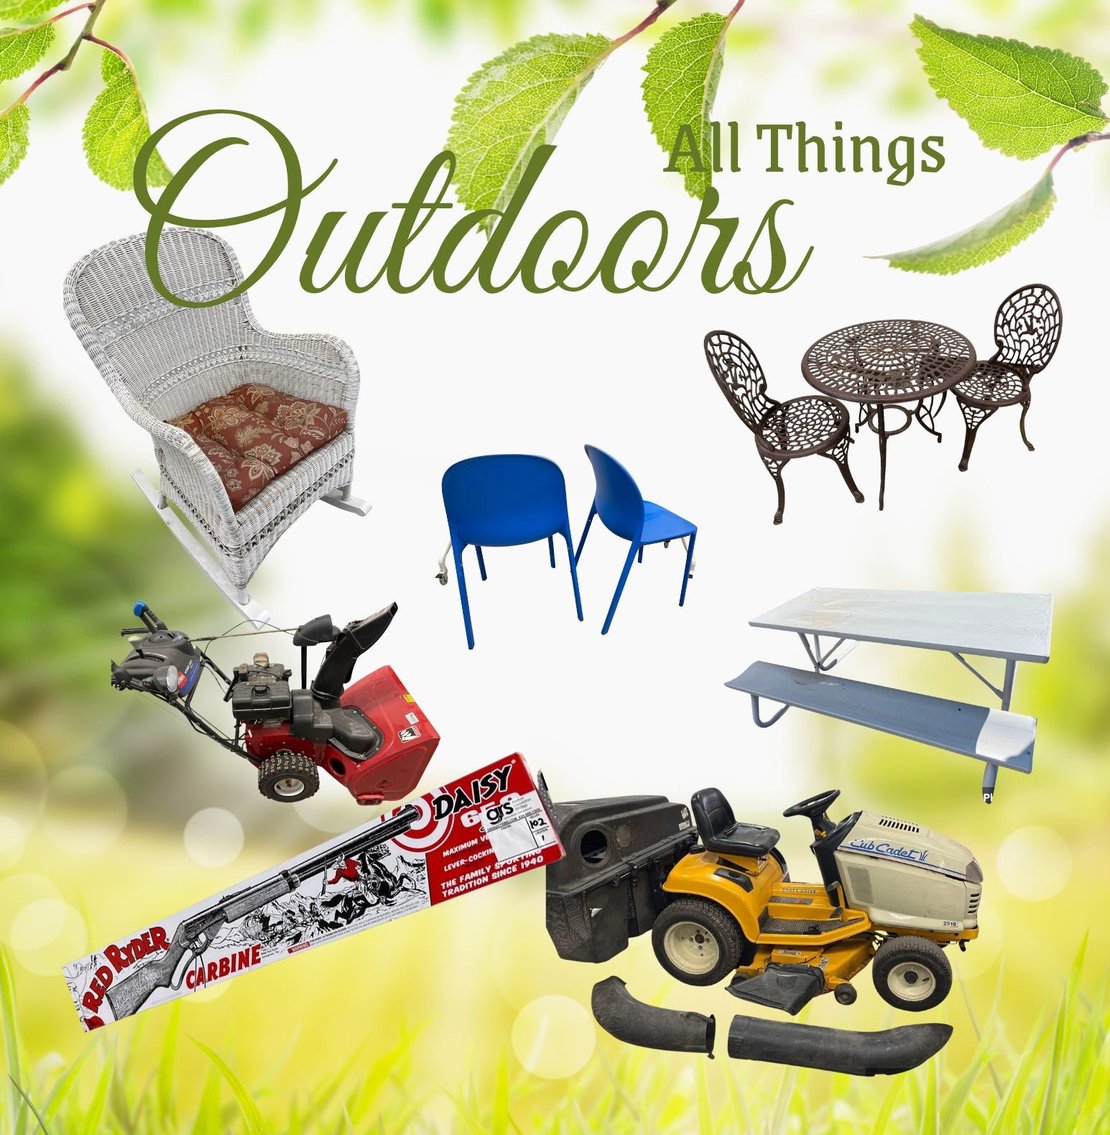 All Things Outdoors